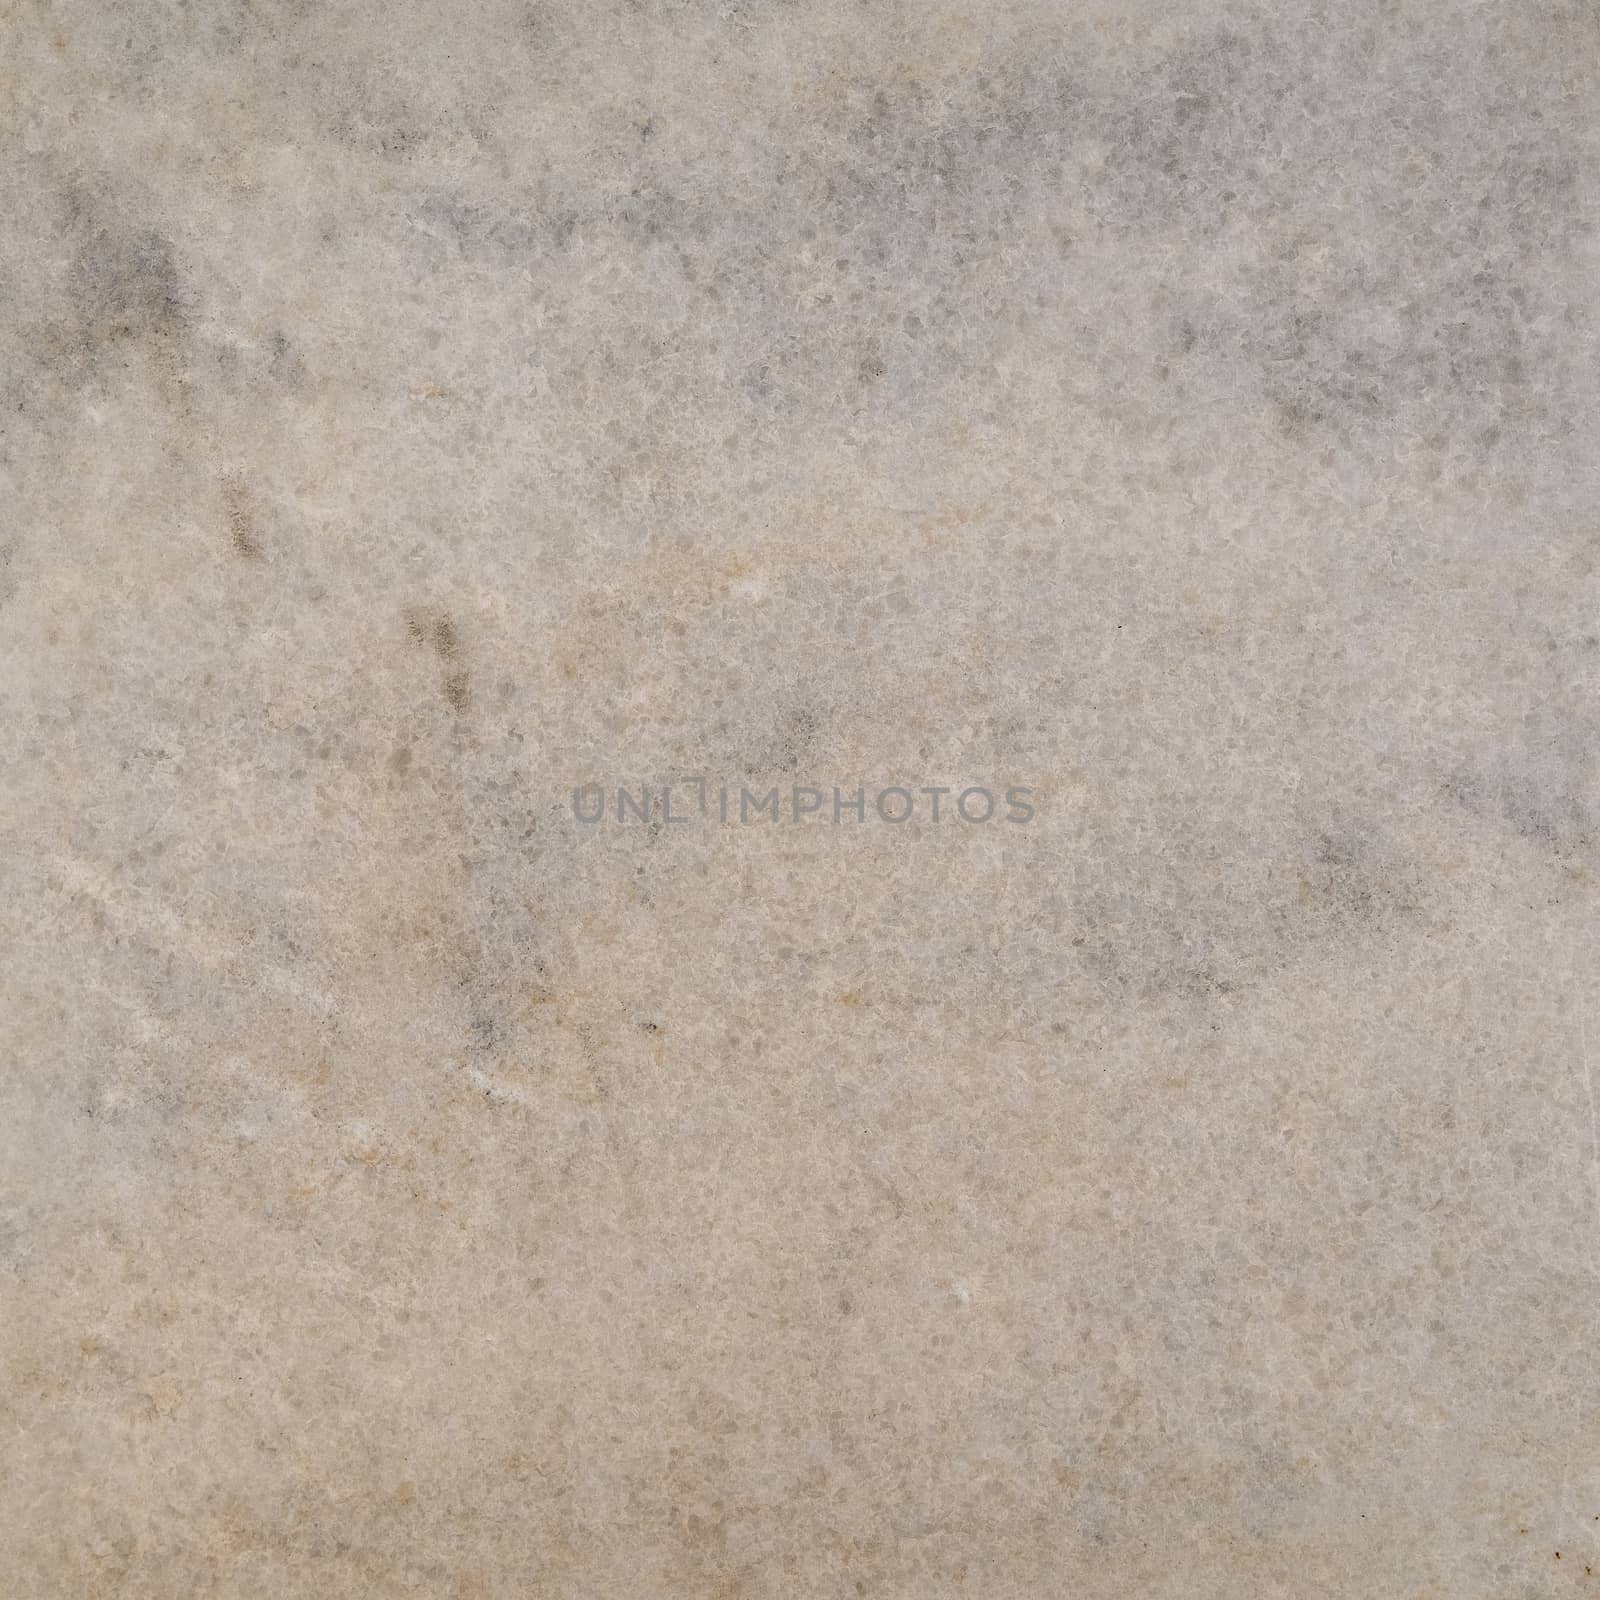 Rough stone texture background. Material construction and architectural detail.